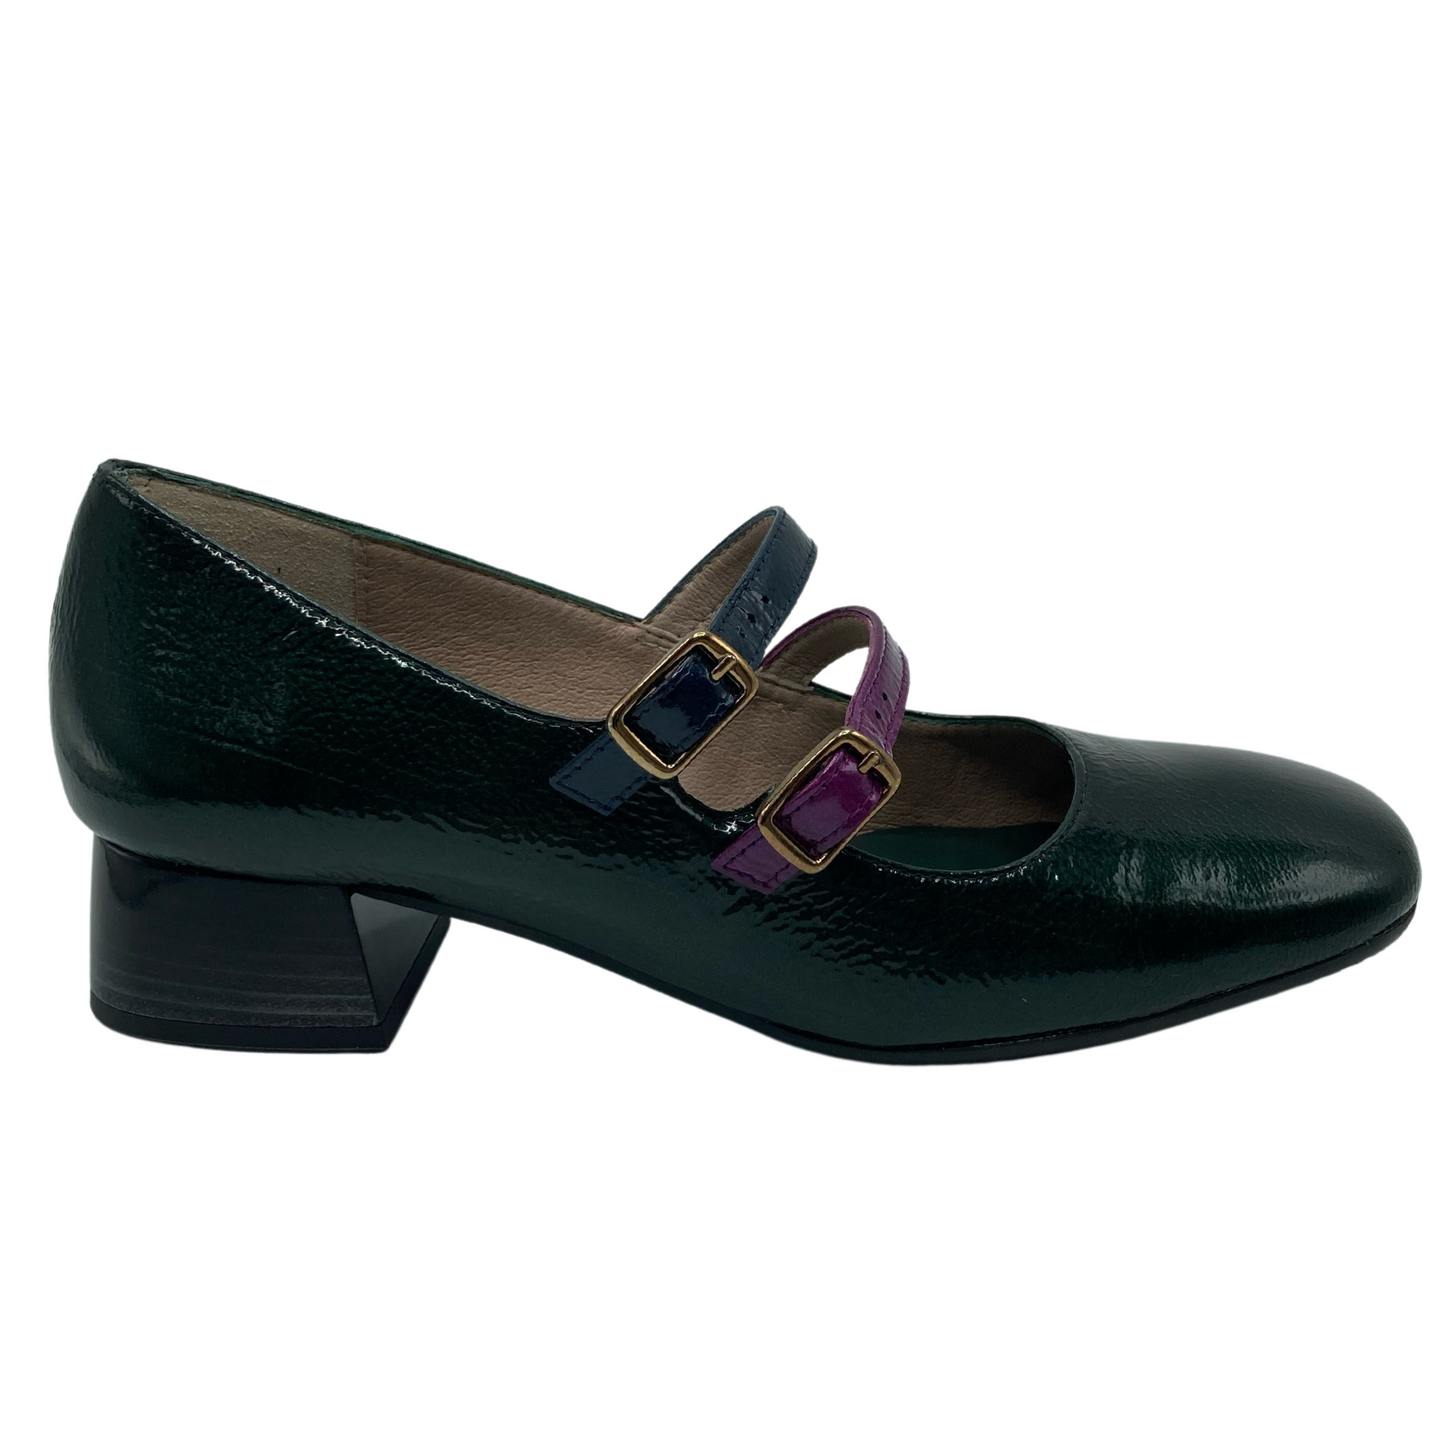 Right facing view of green leather mary jane with block heel, one navy strap and one purple strap